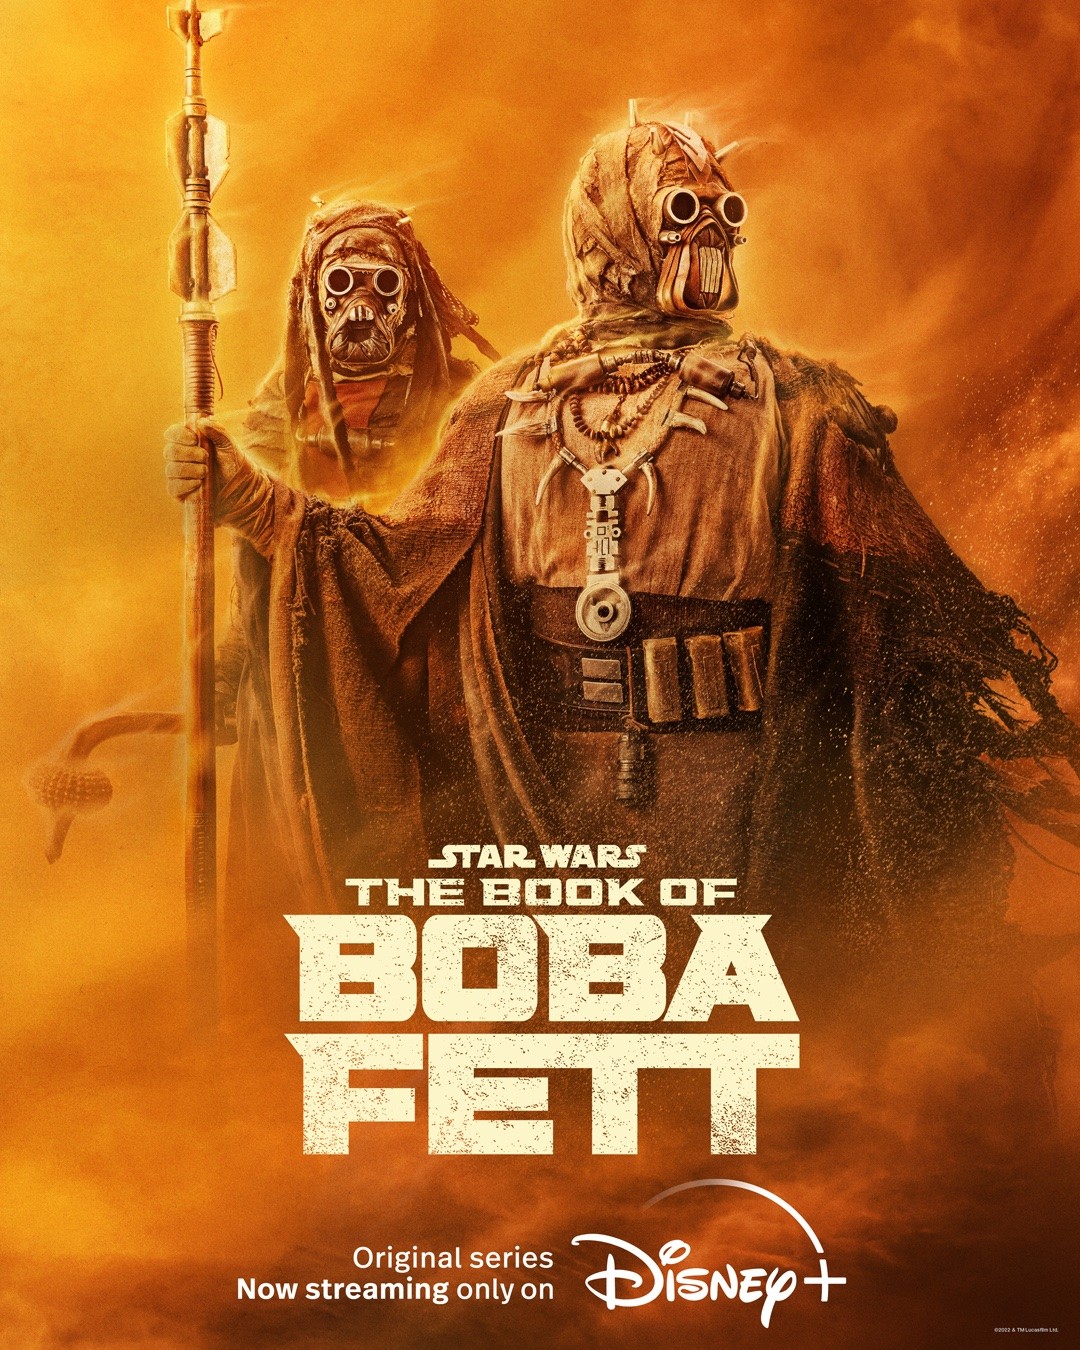  Tusken Raiders | The Book Of Boba Fett | Character Poster